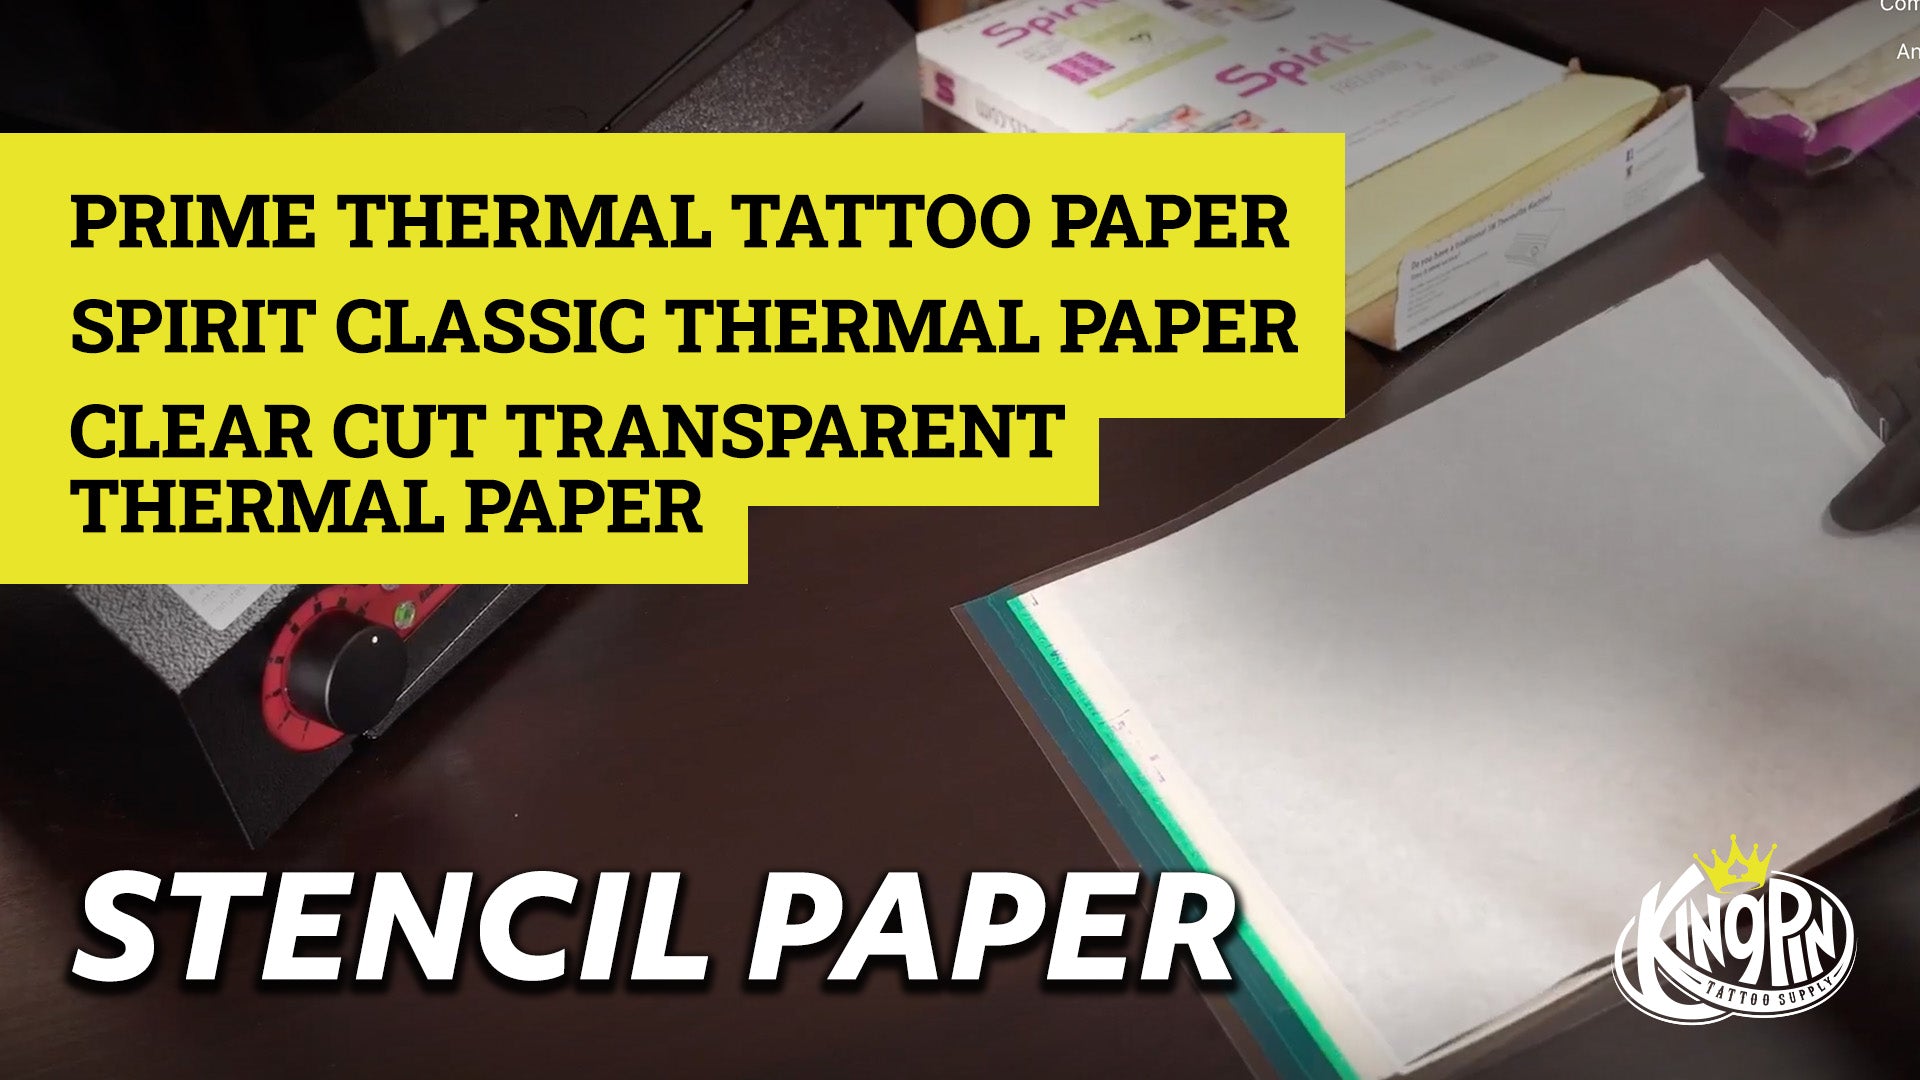 Whats Best Thermal Papers for Tattoos? Article Image